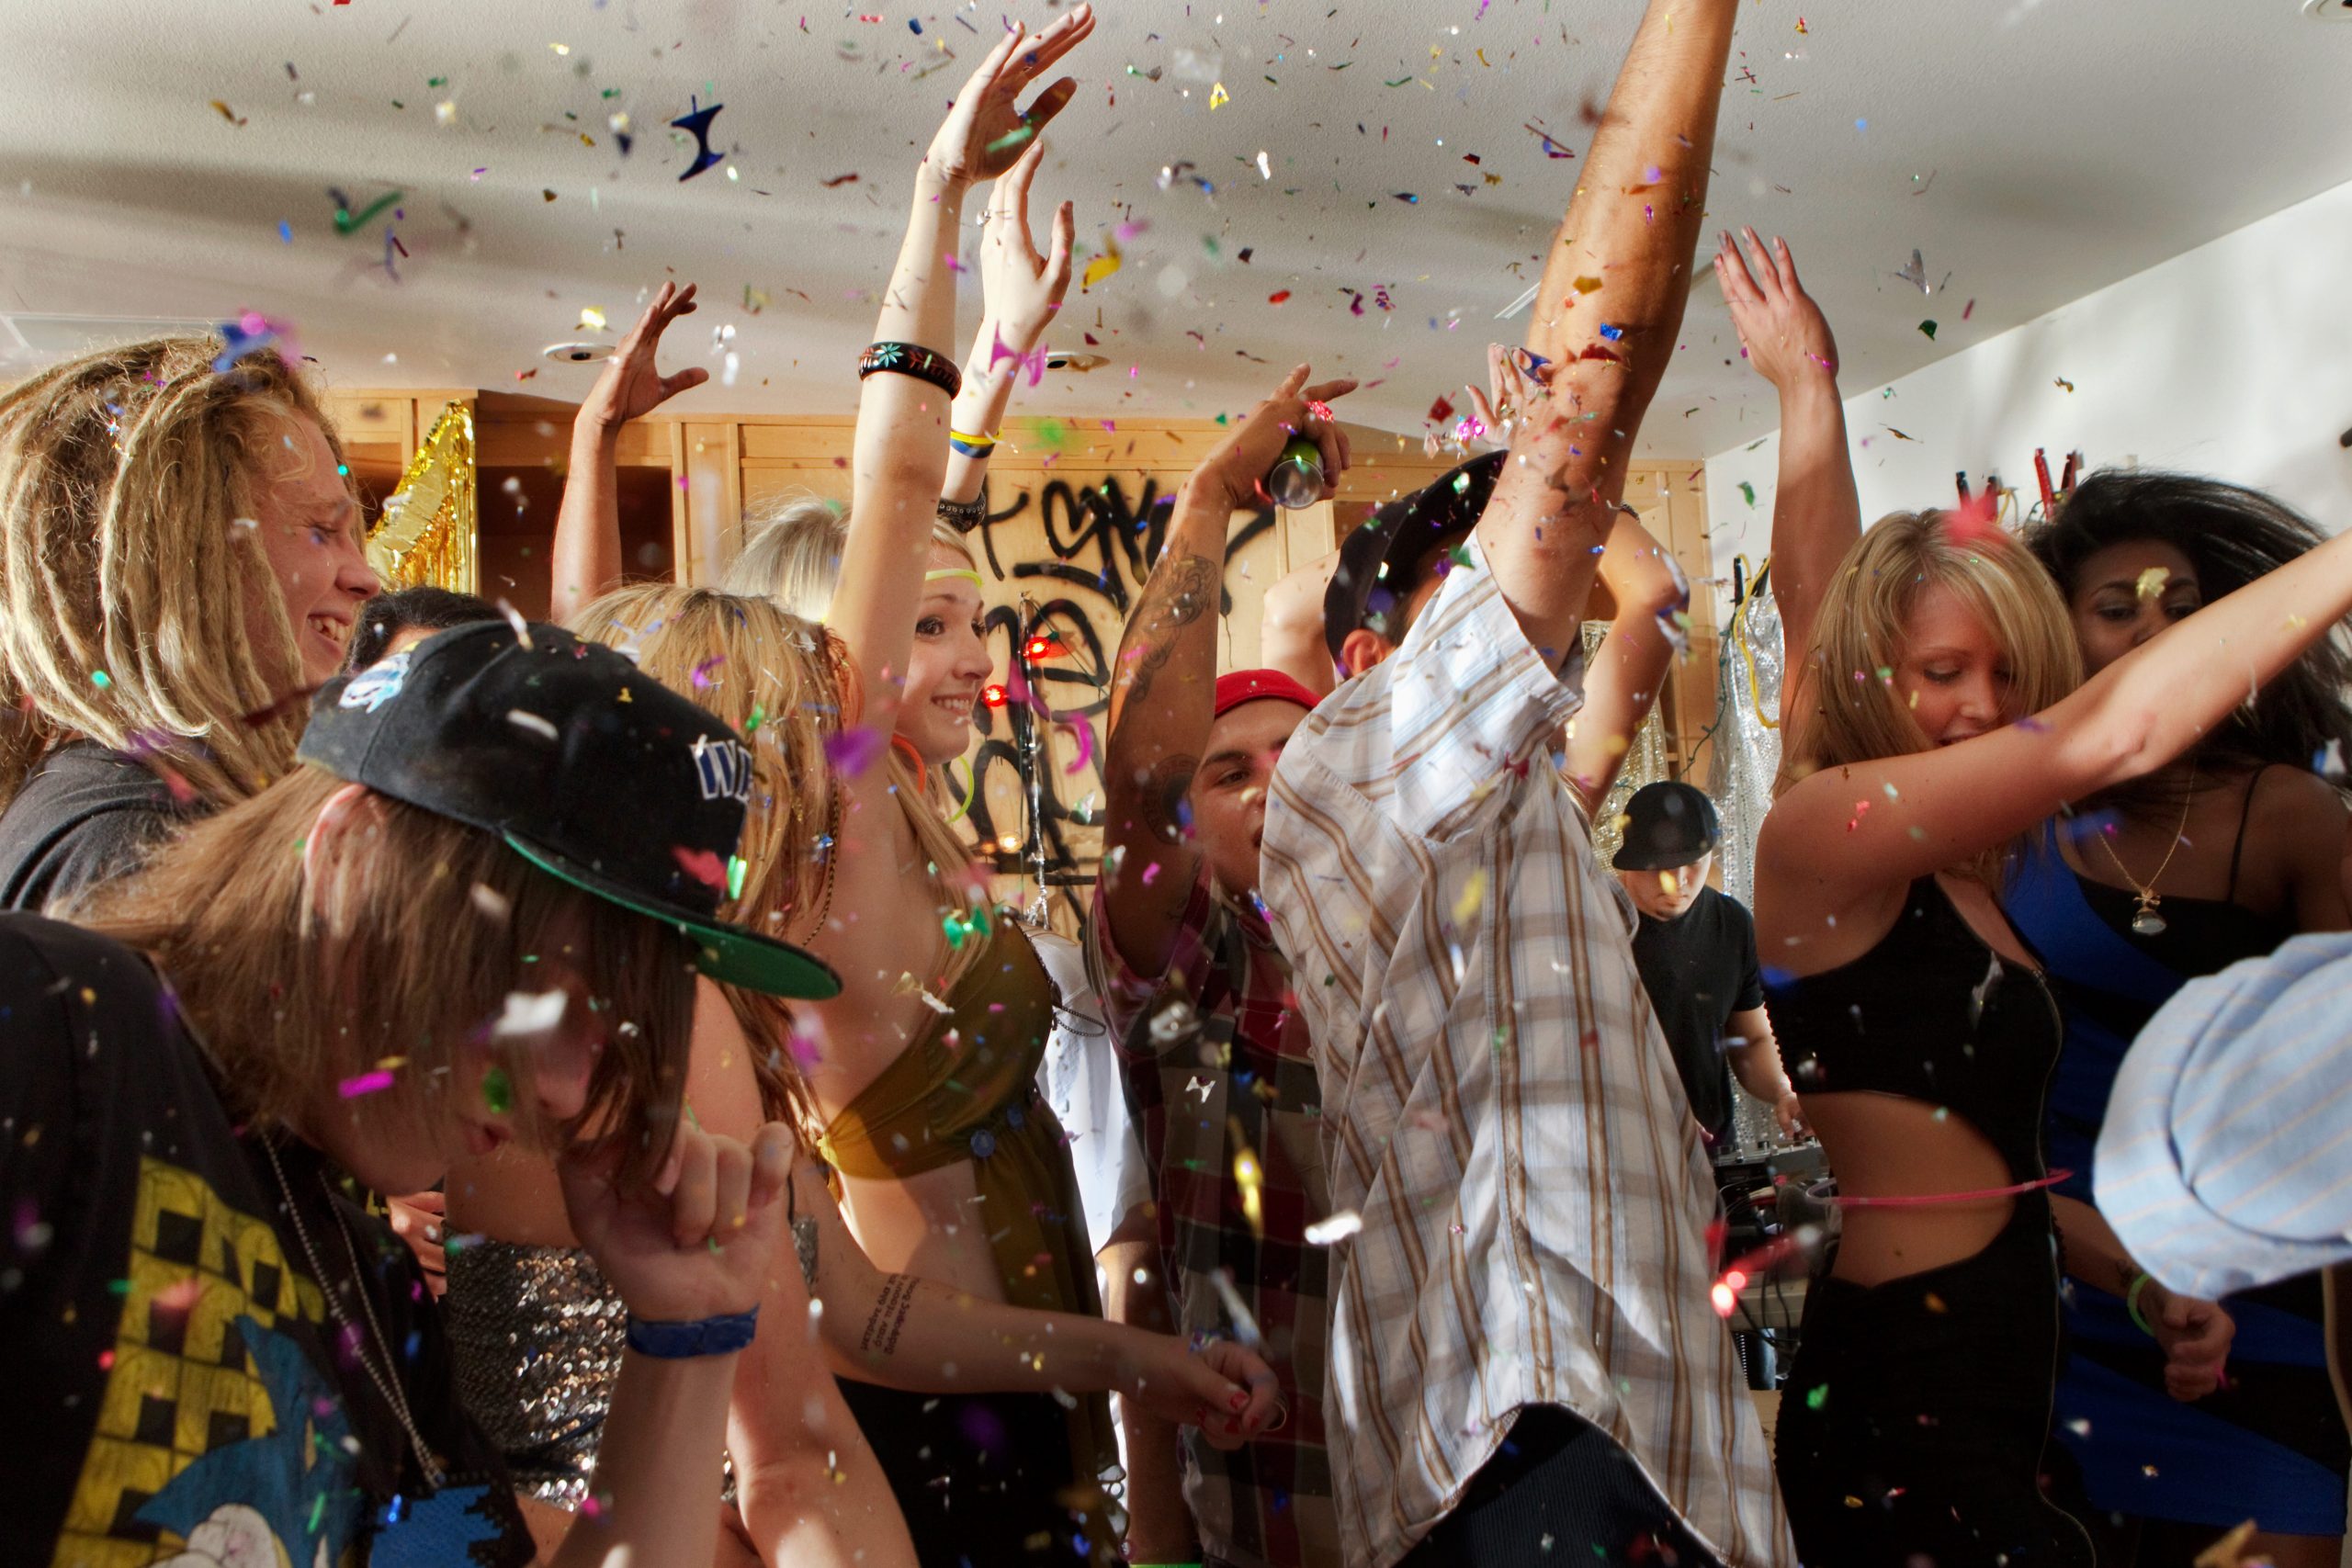 Ideas to Spice Up Your House Party…